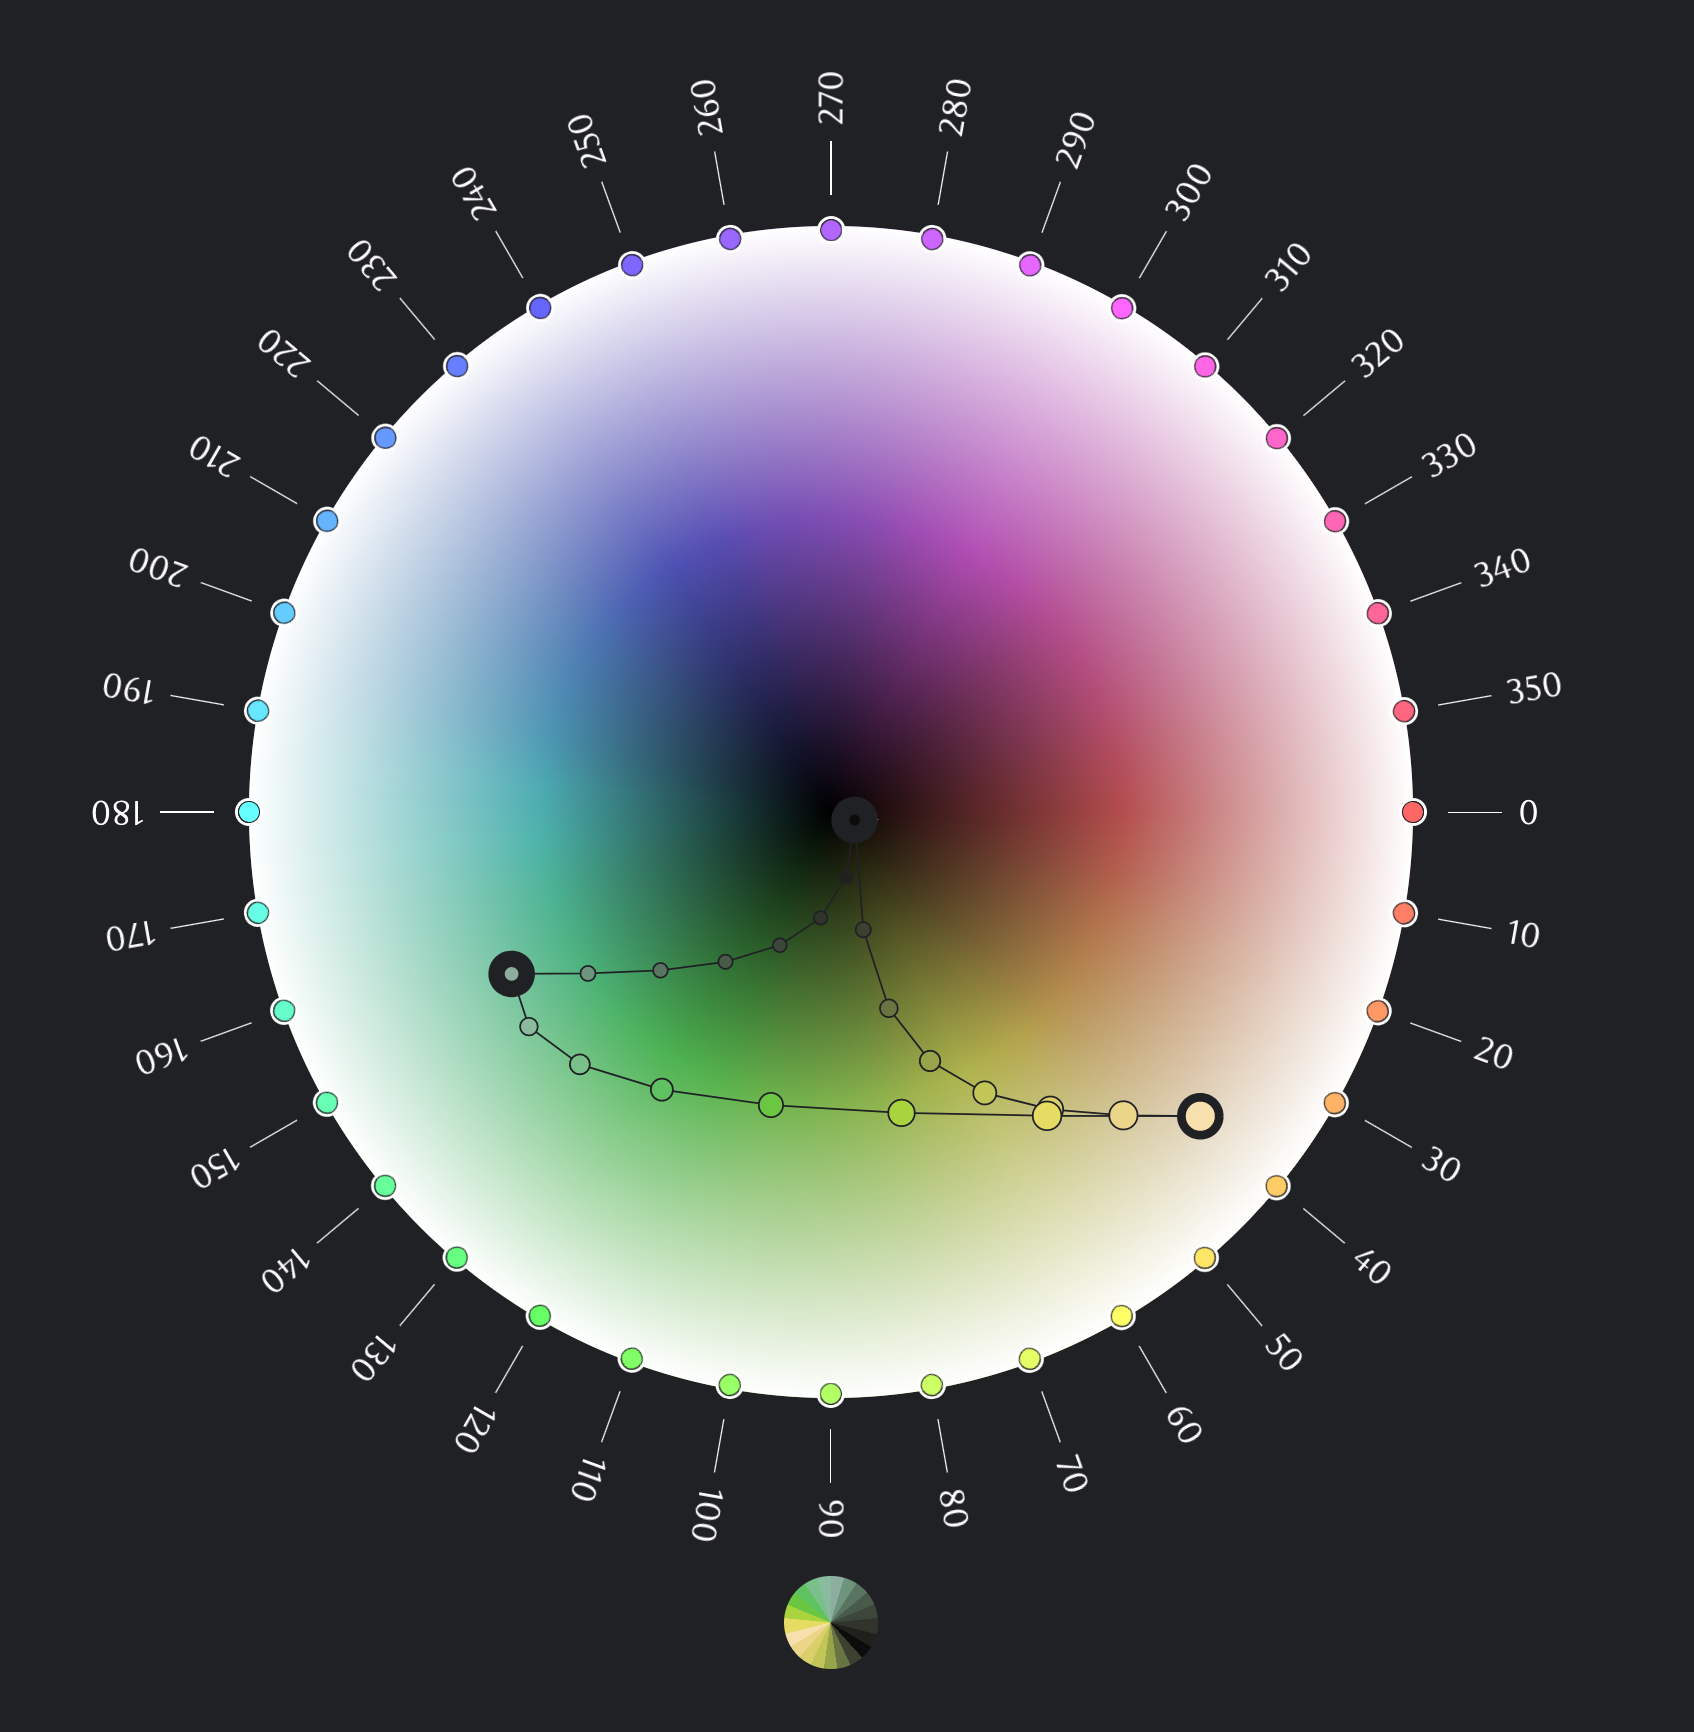 A color space visualization showing different color points.